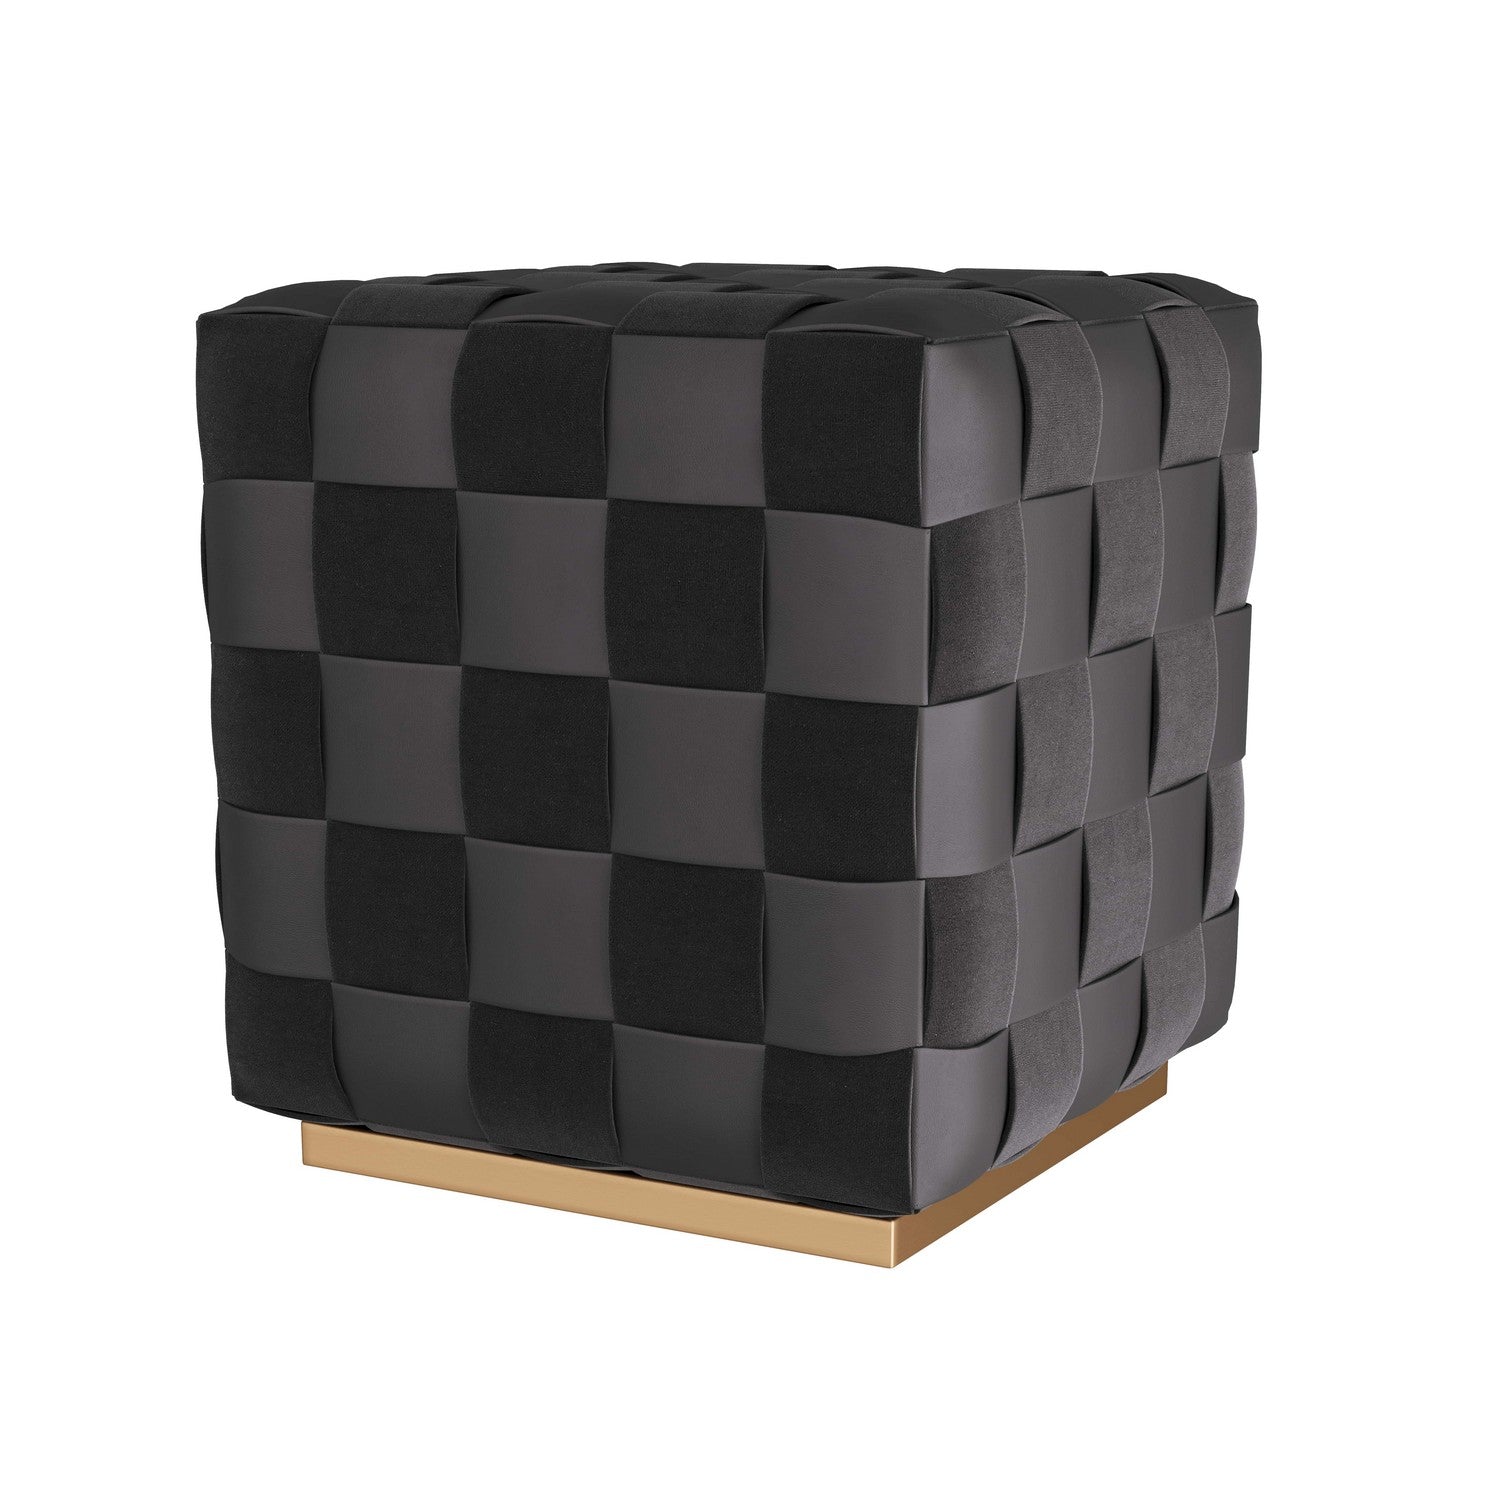 Ottoman from the Winnetka collection in Black finish